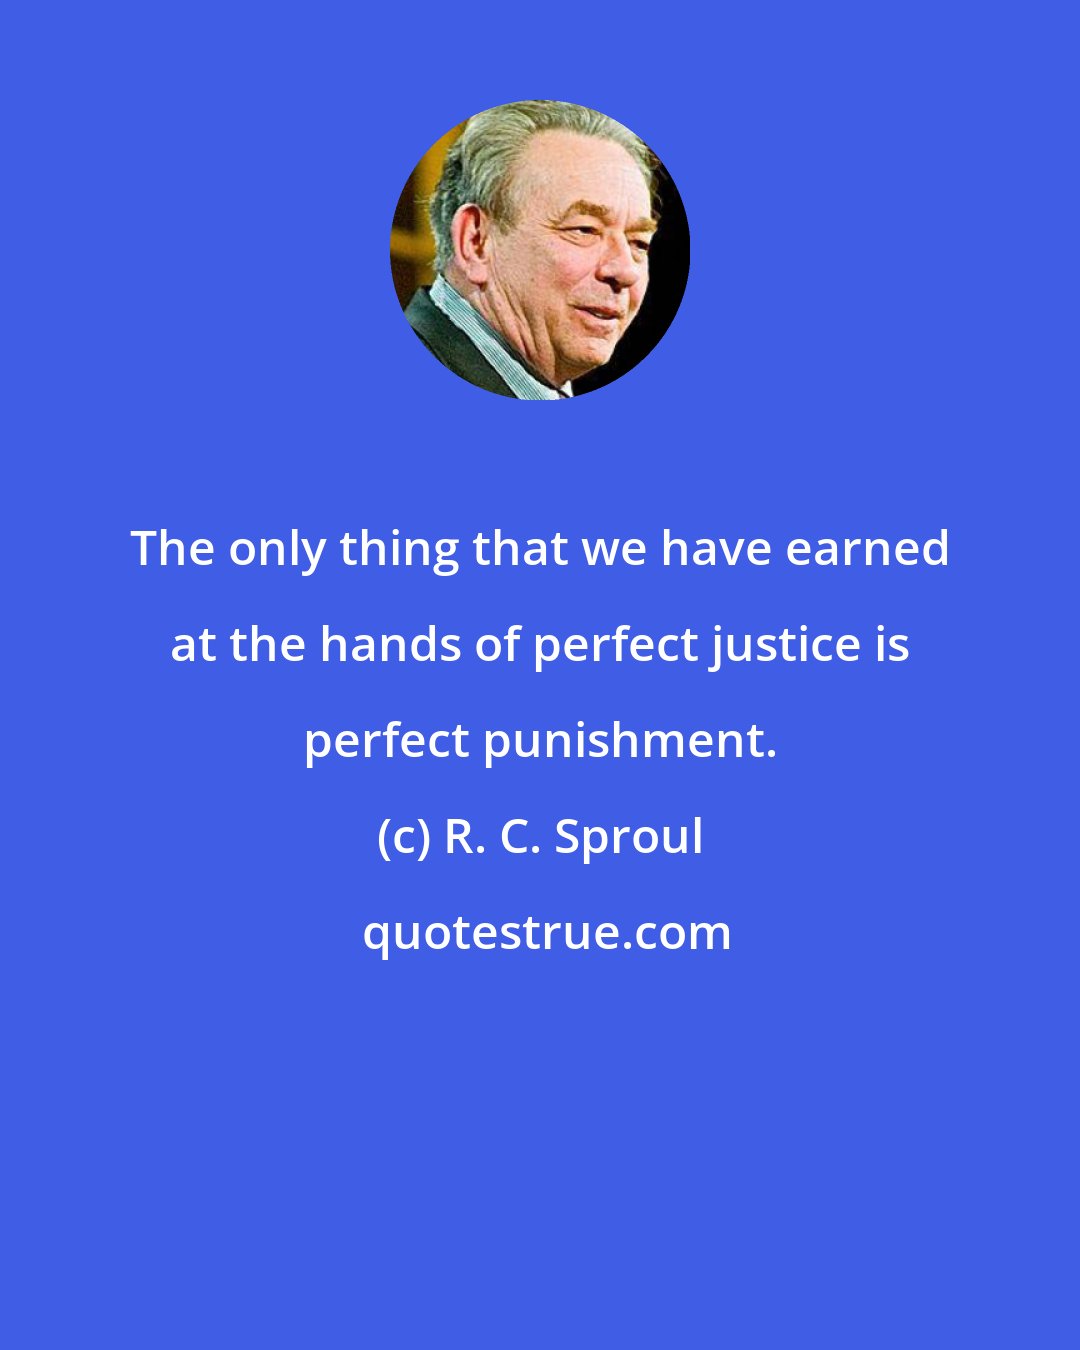 R. C. Sproul: The only thing that we have earned at the hands of perfect justice is perfect punishment.